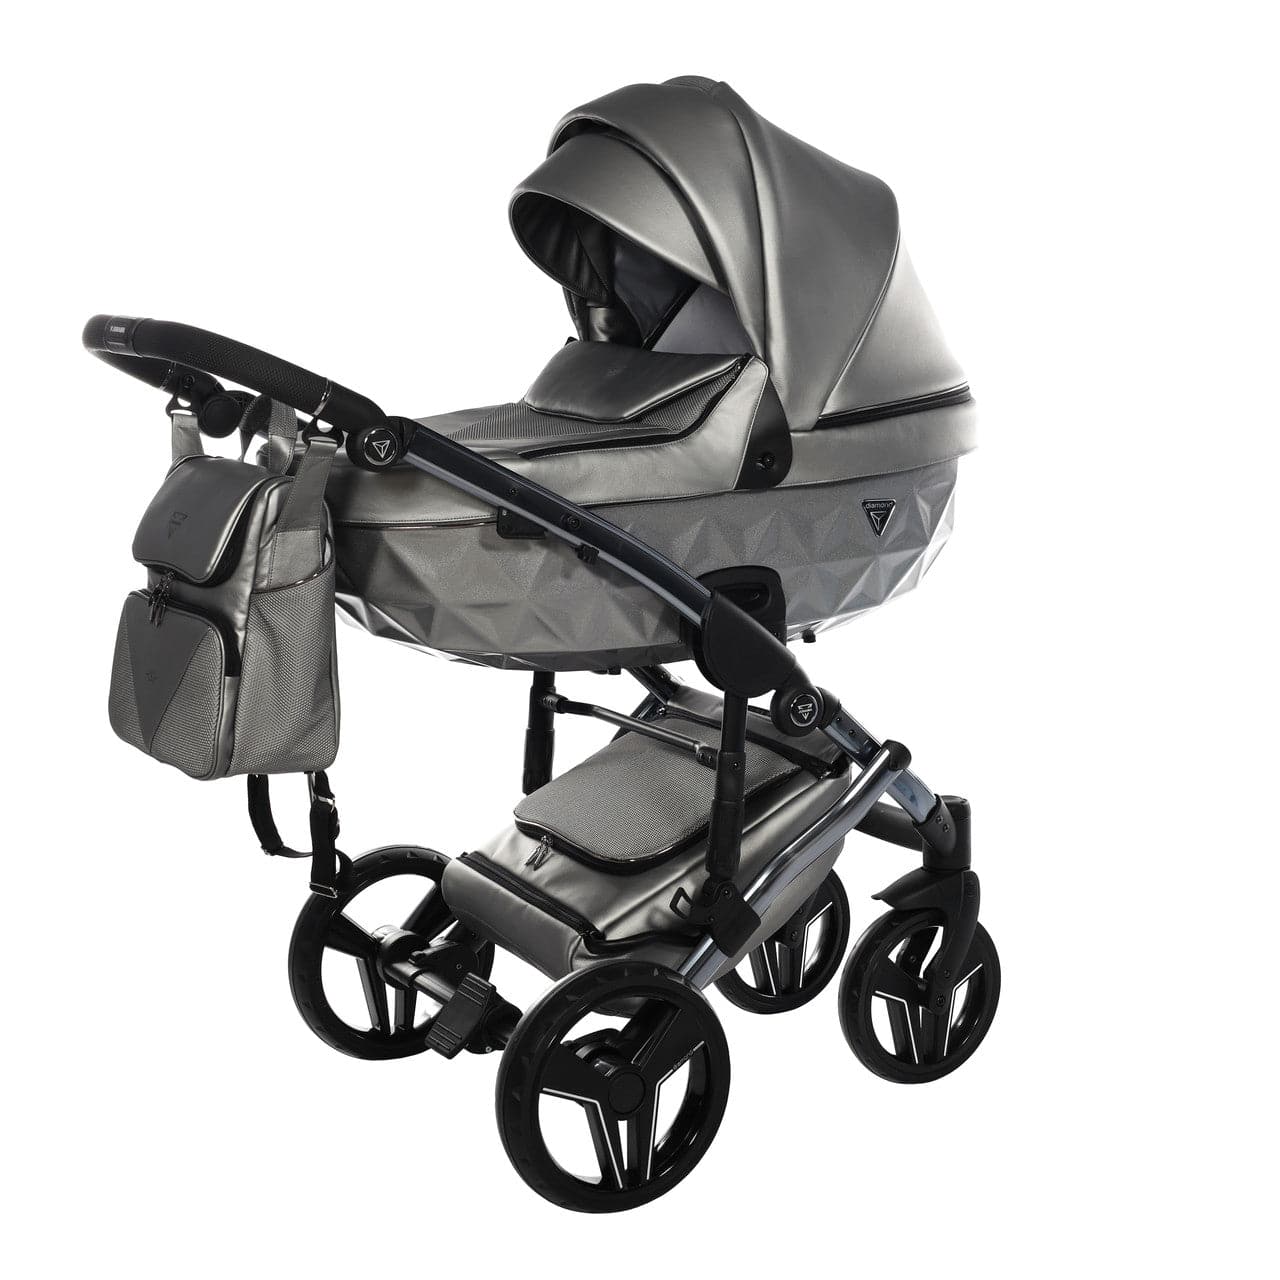 Junama S-Class 3 In 1 Travel System - Silver - For Your Little One